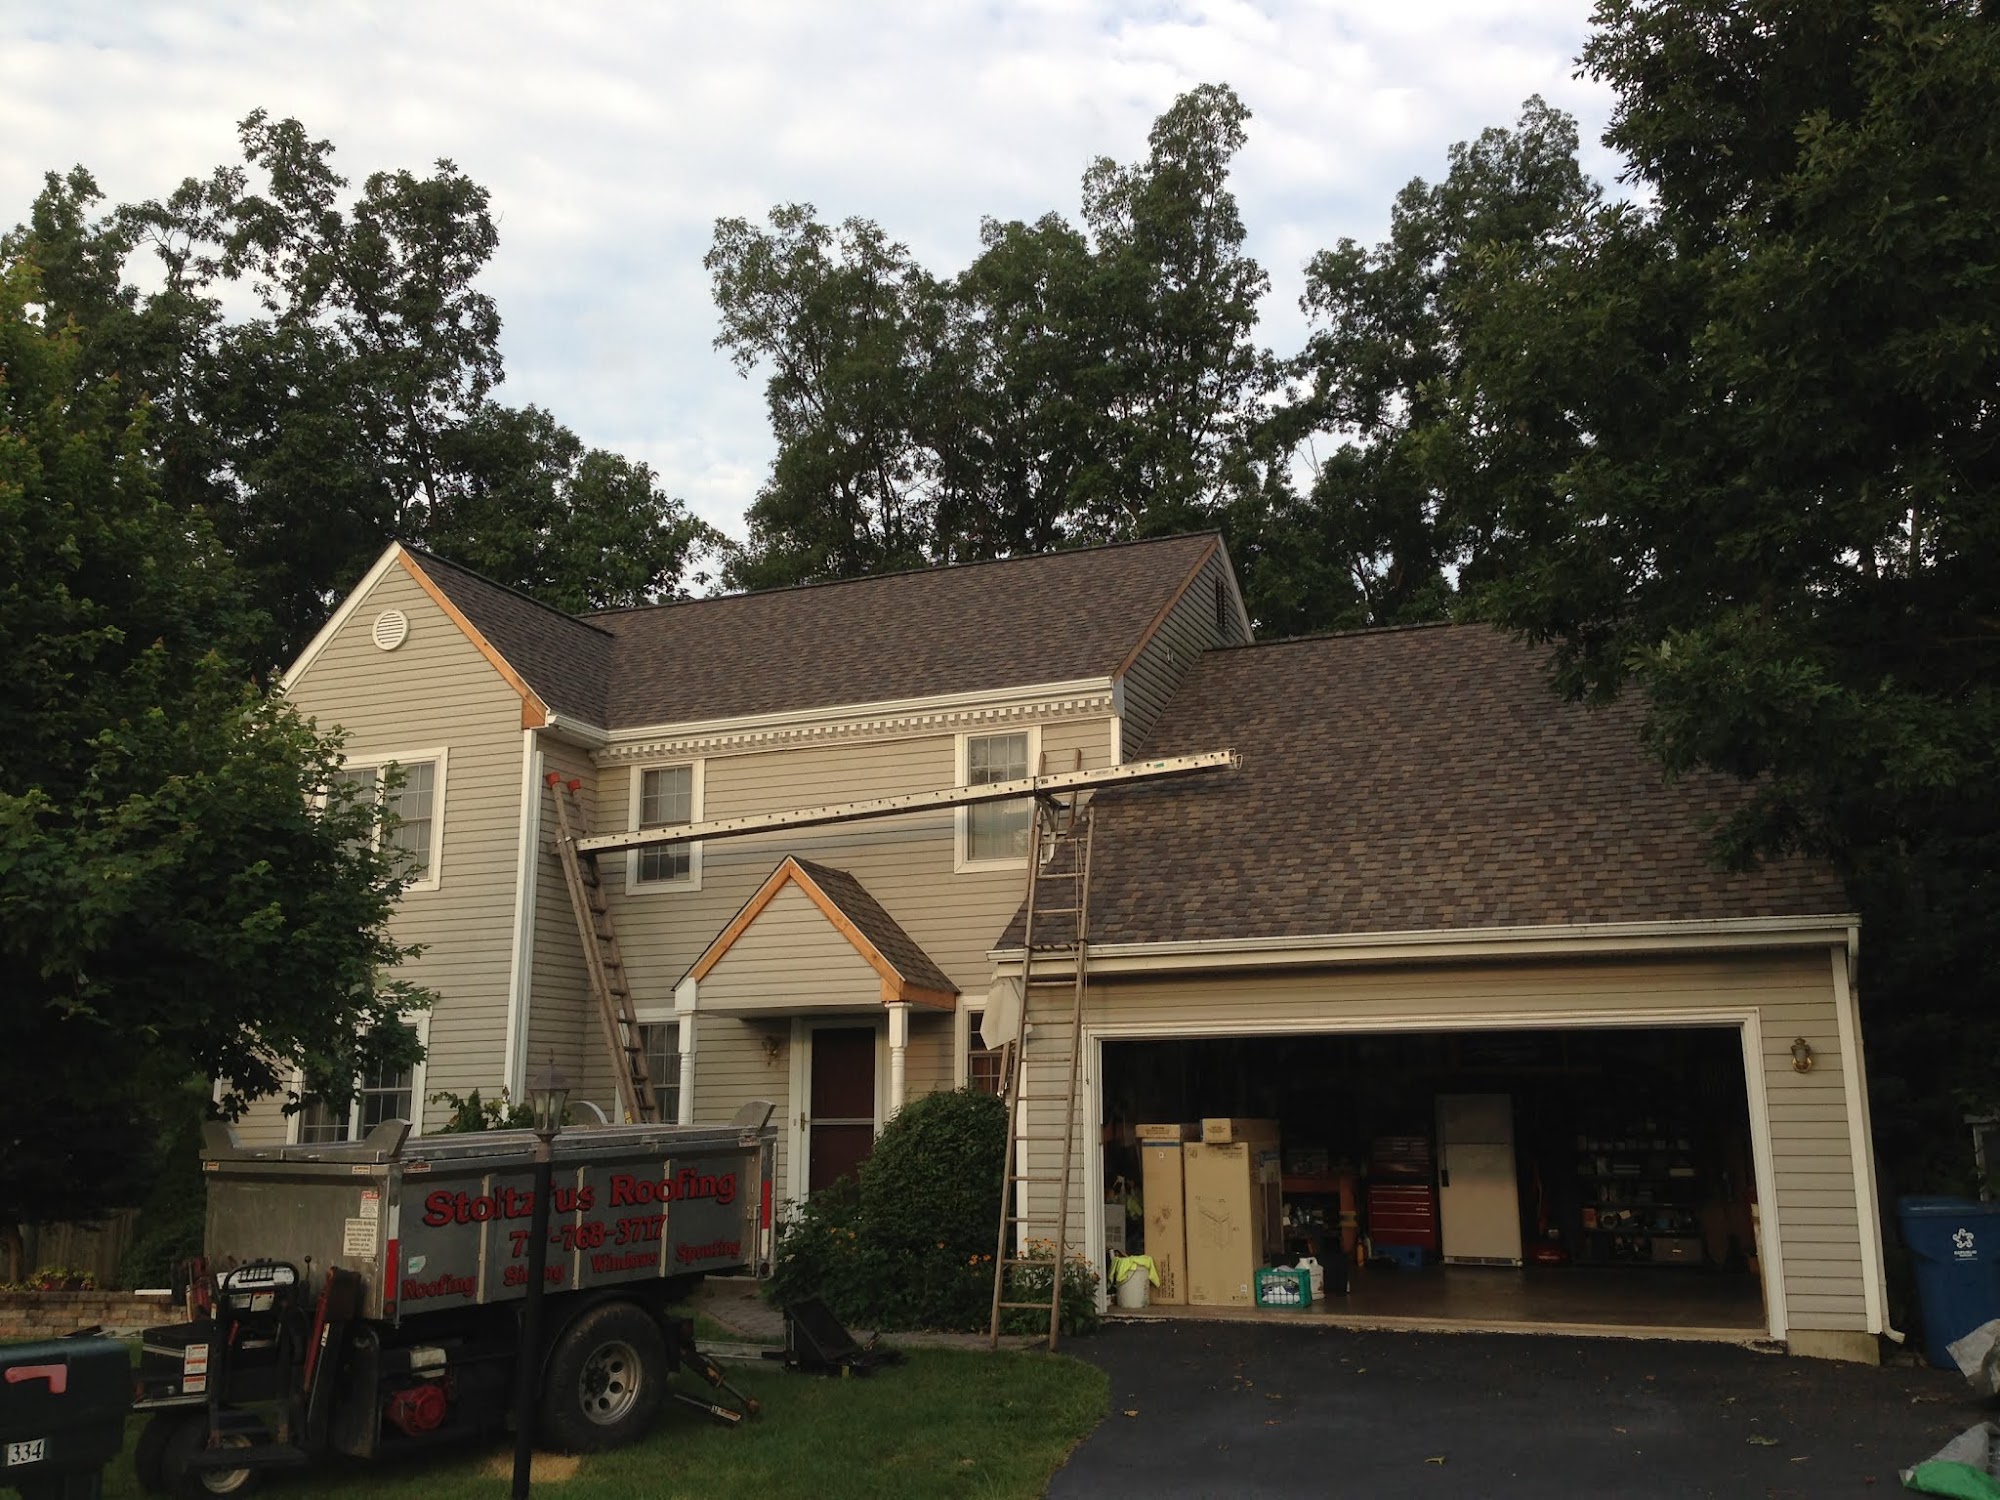 Stoltzfus Roofing & Siding